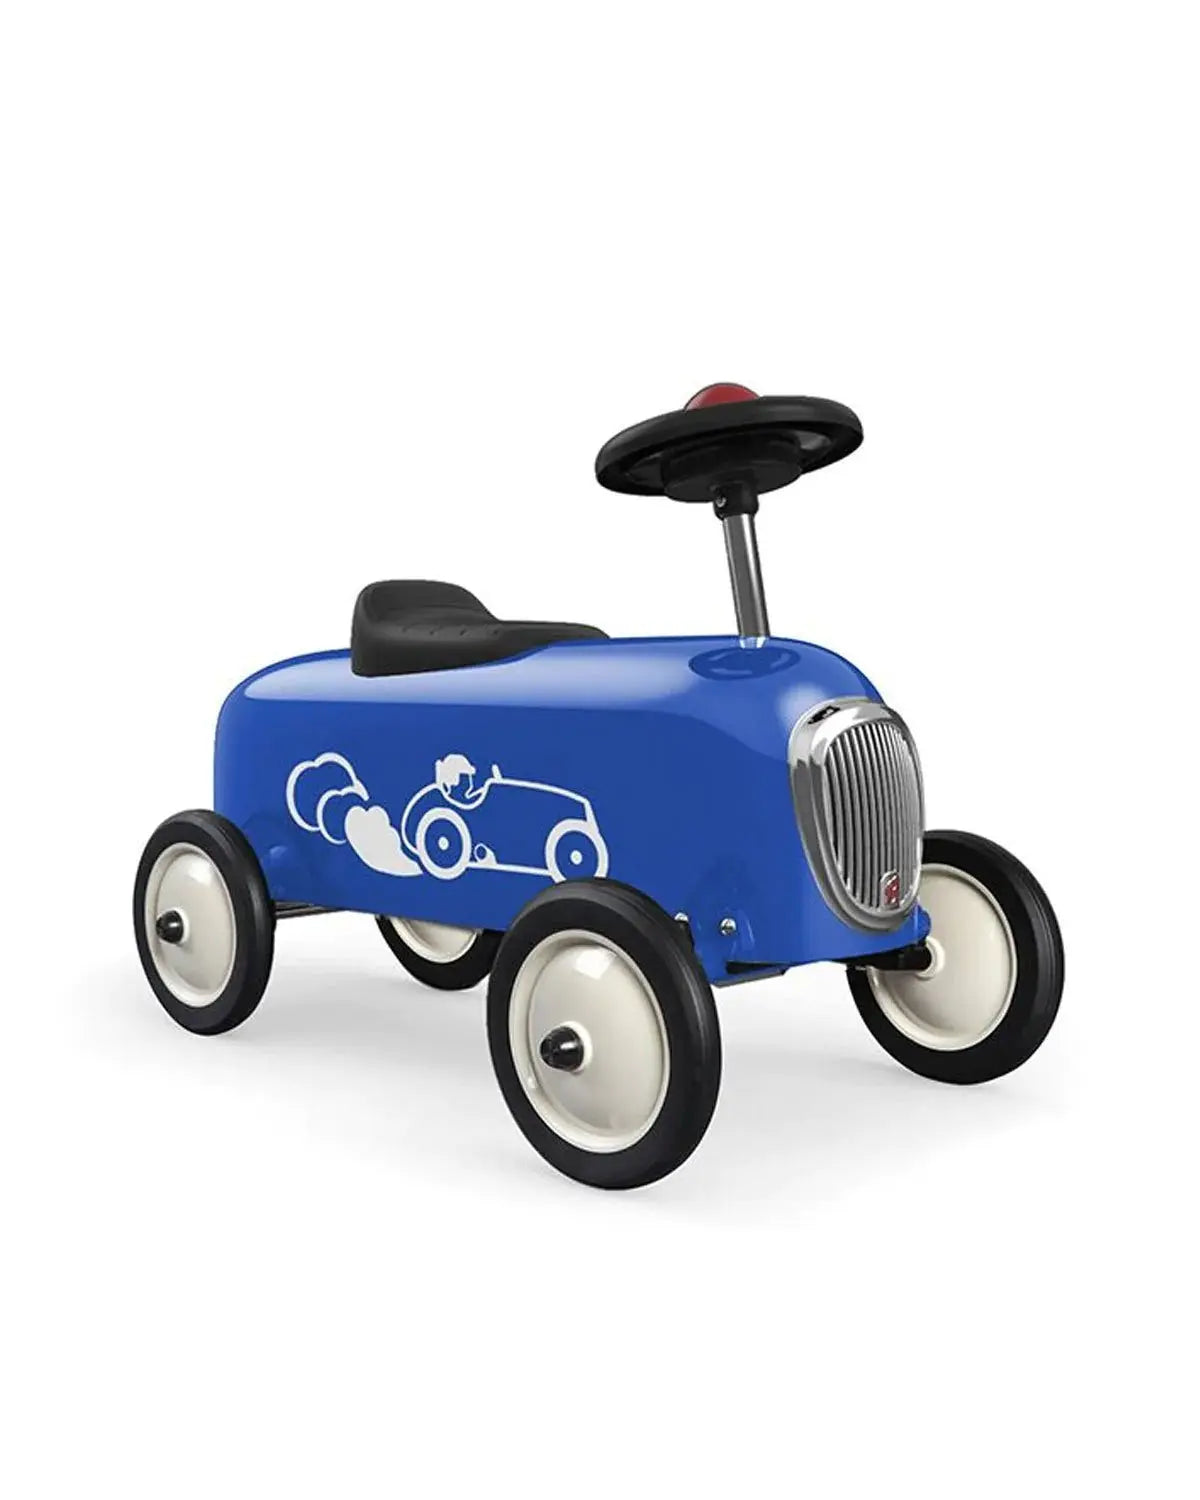 Small Ride-on Racer, Toy Car with Horn, Simple Design, Perfect for Toddlers  Baghera Blue  